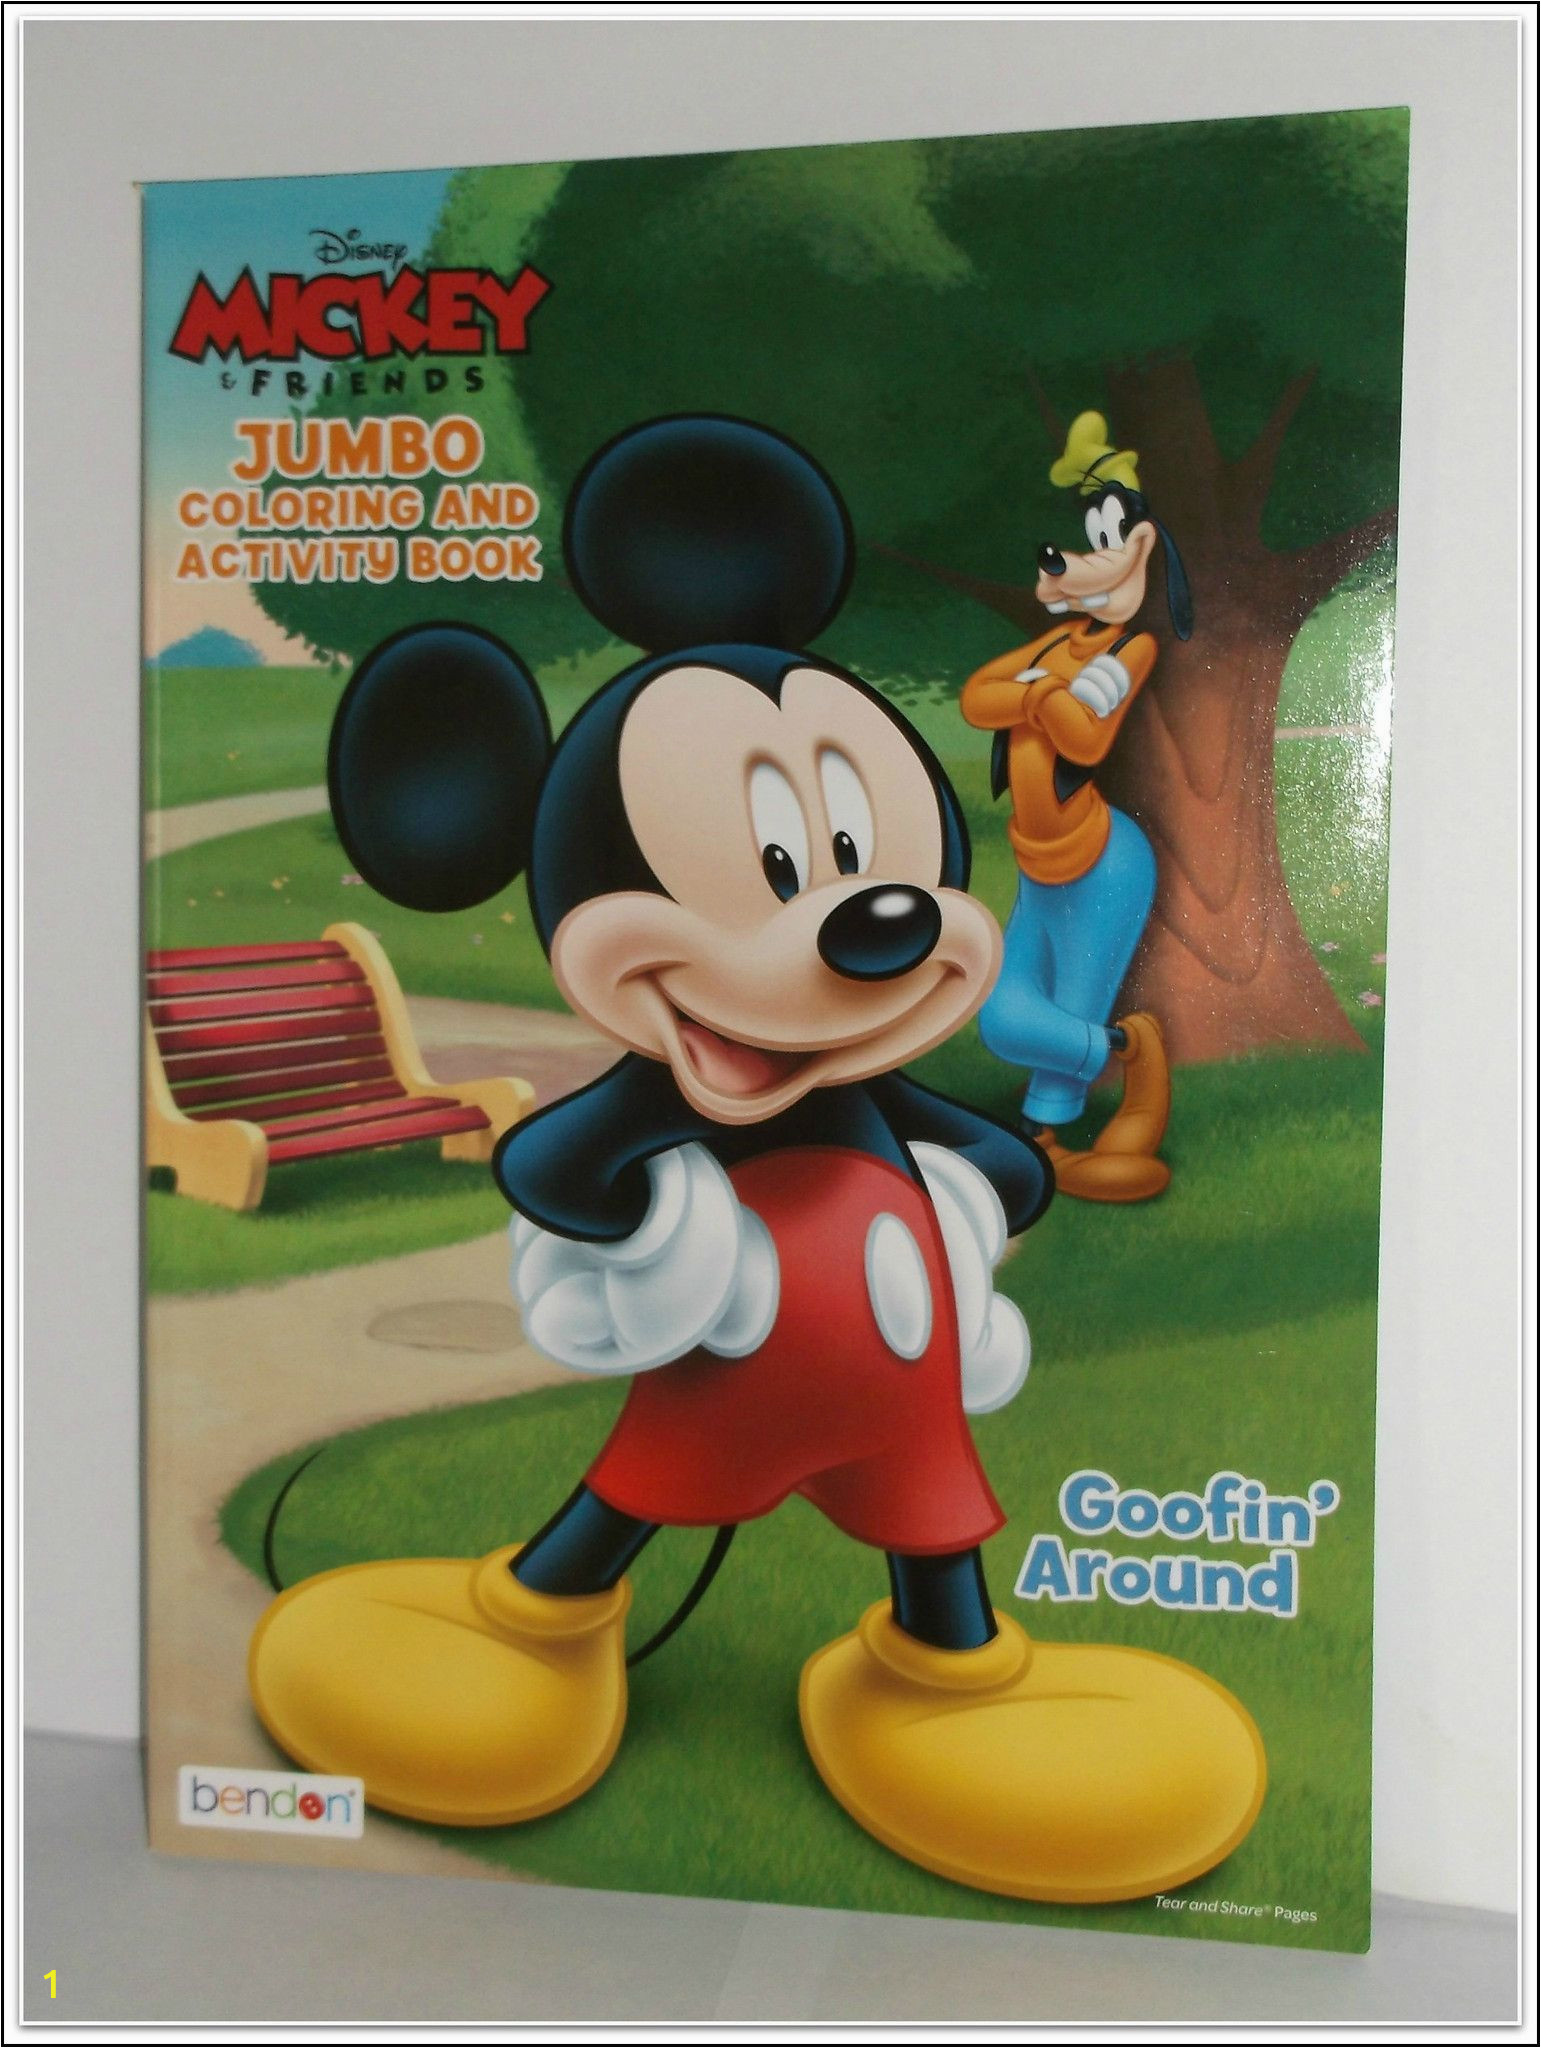 Crayola Giant Coloring Pages Mickey Mouse Kids Coloring Book Disney Mickey & Friends Jumbo Coloring